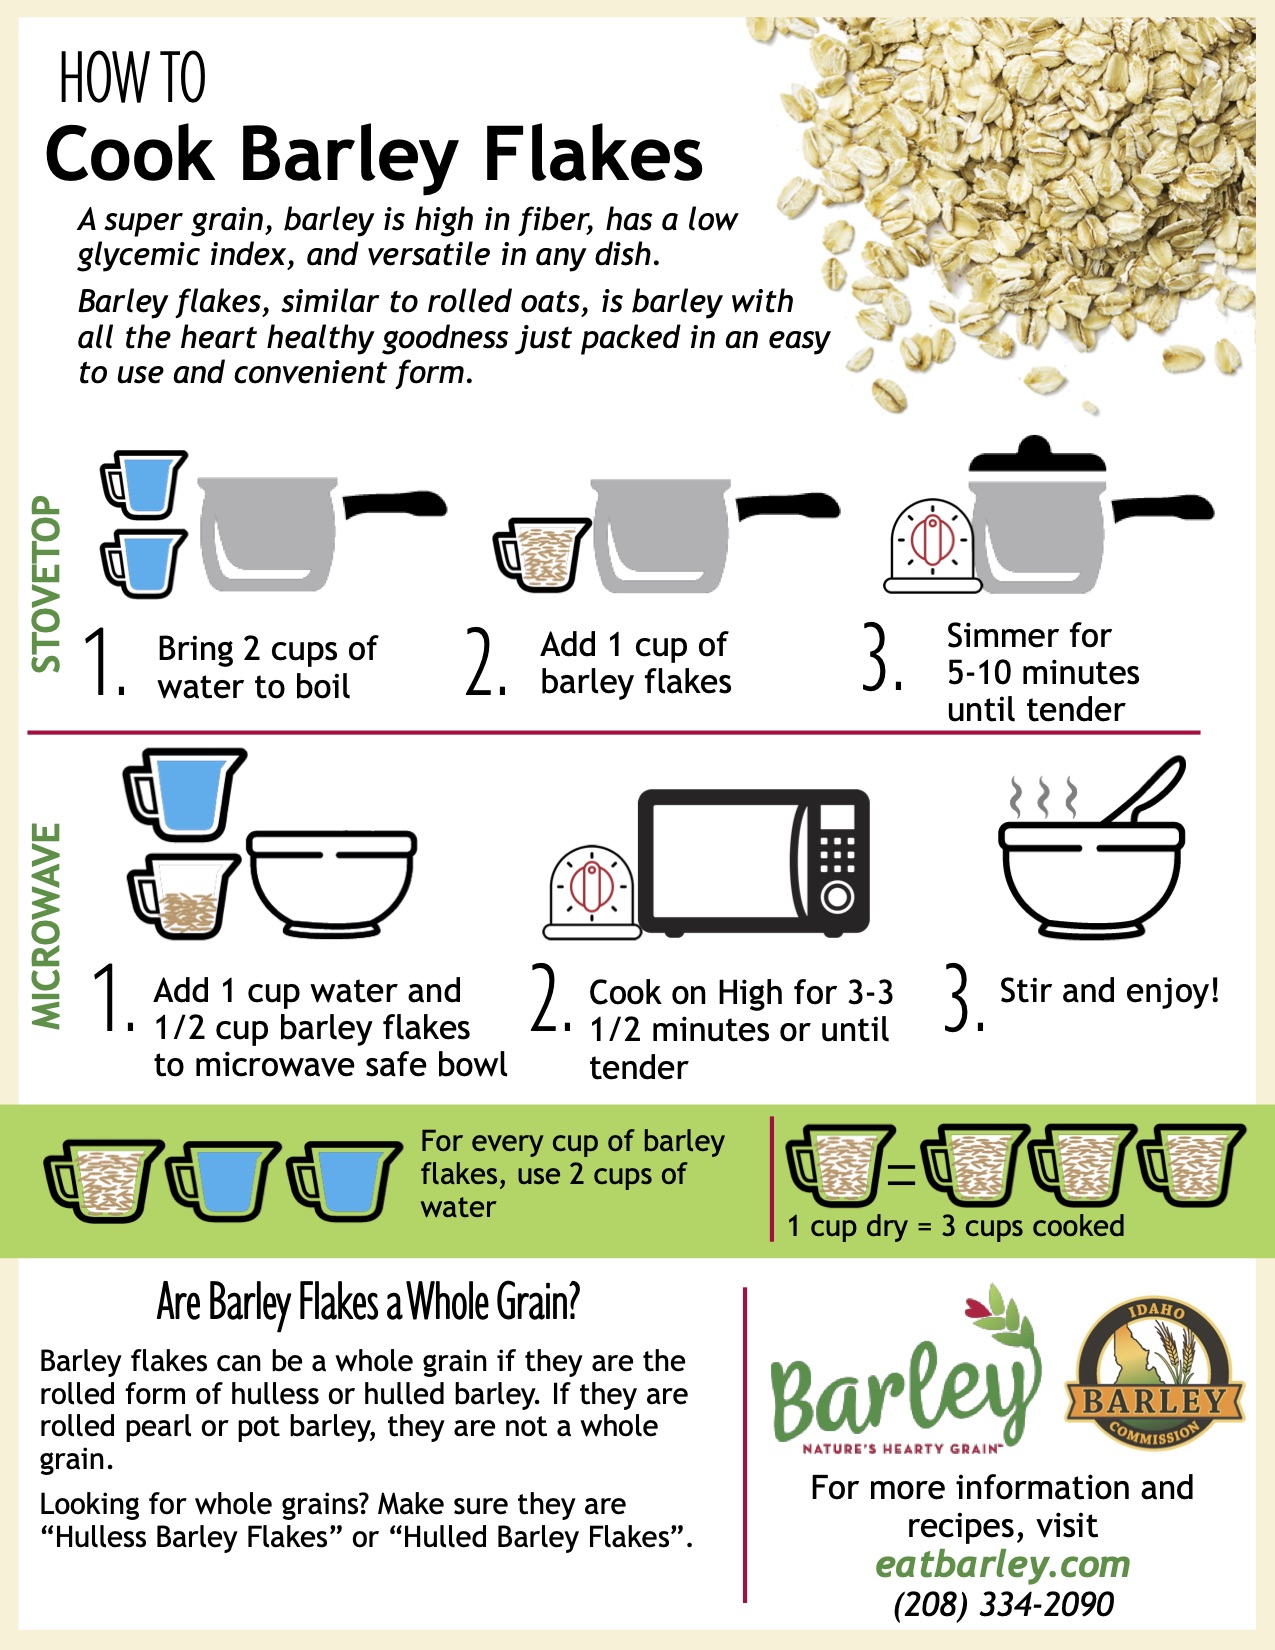 How-to guide for cooking barley flakes